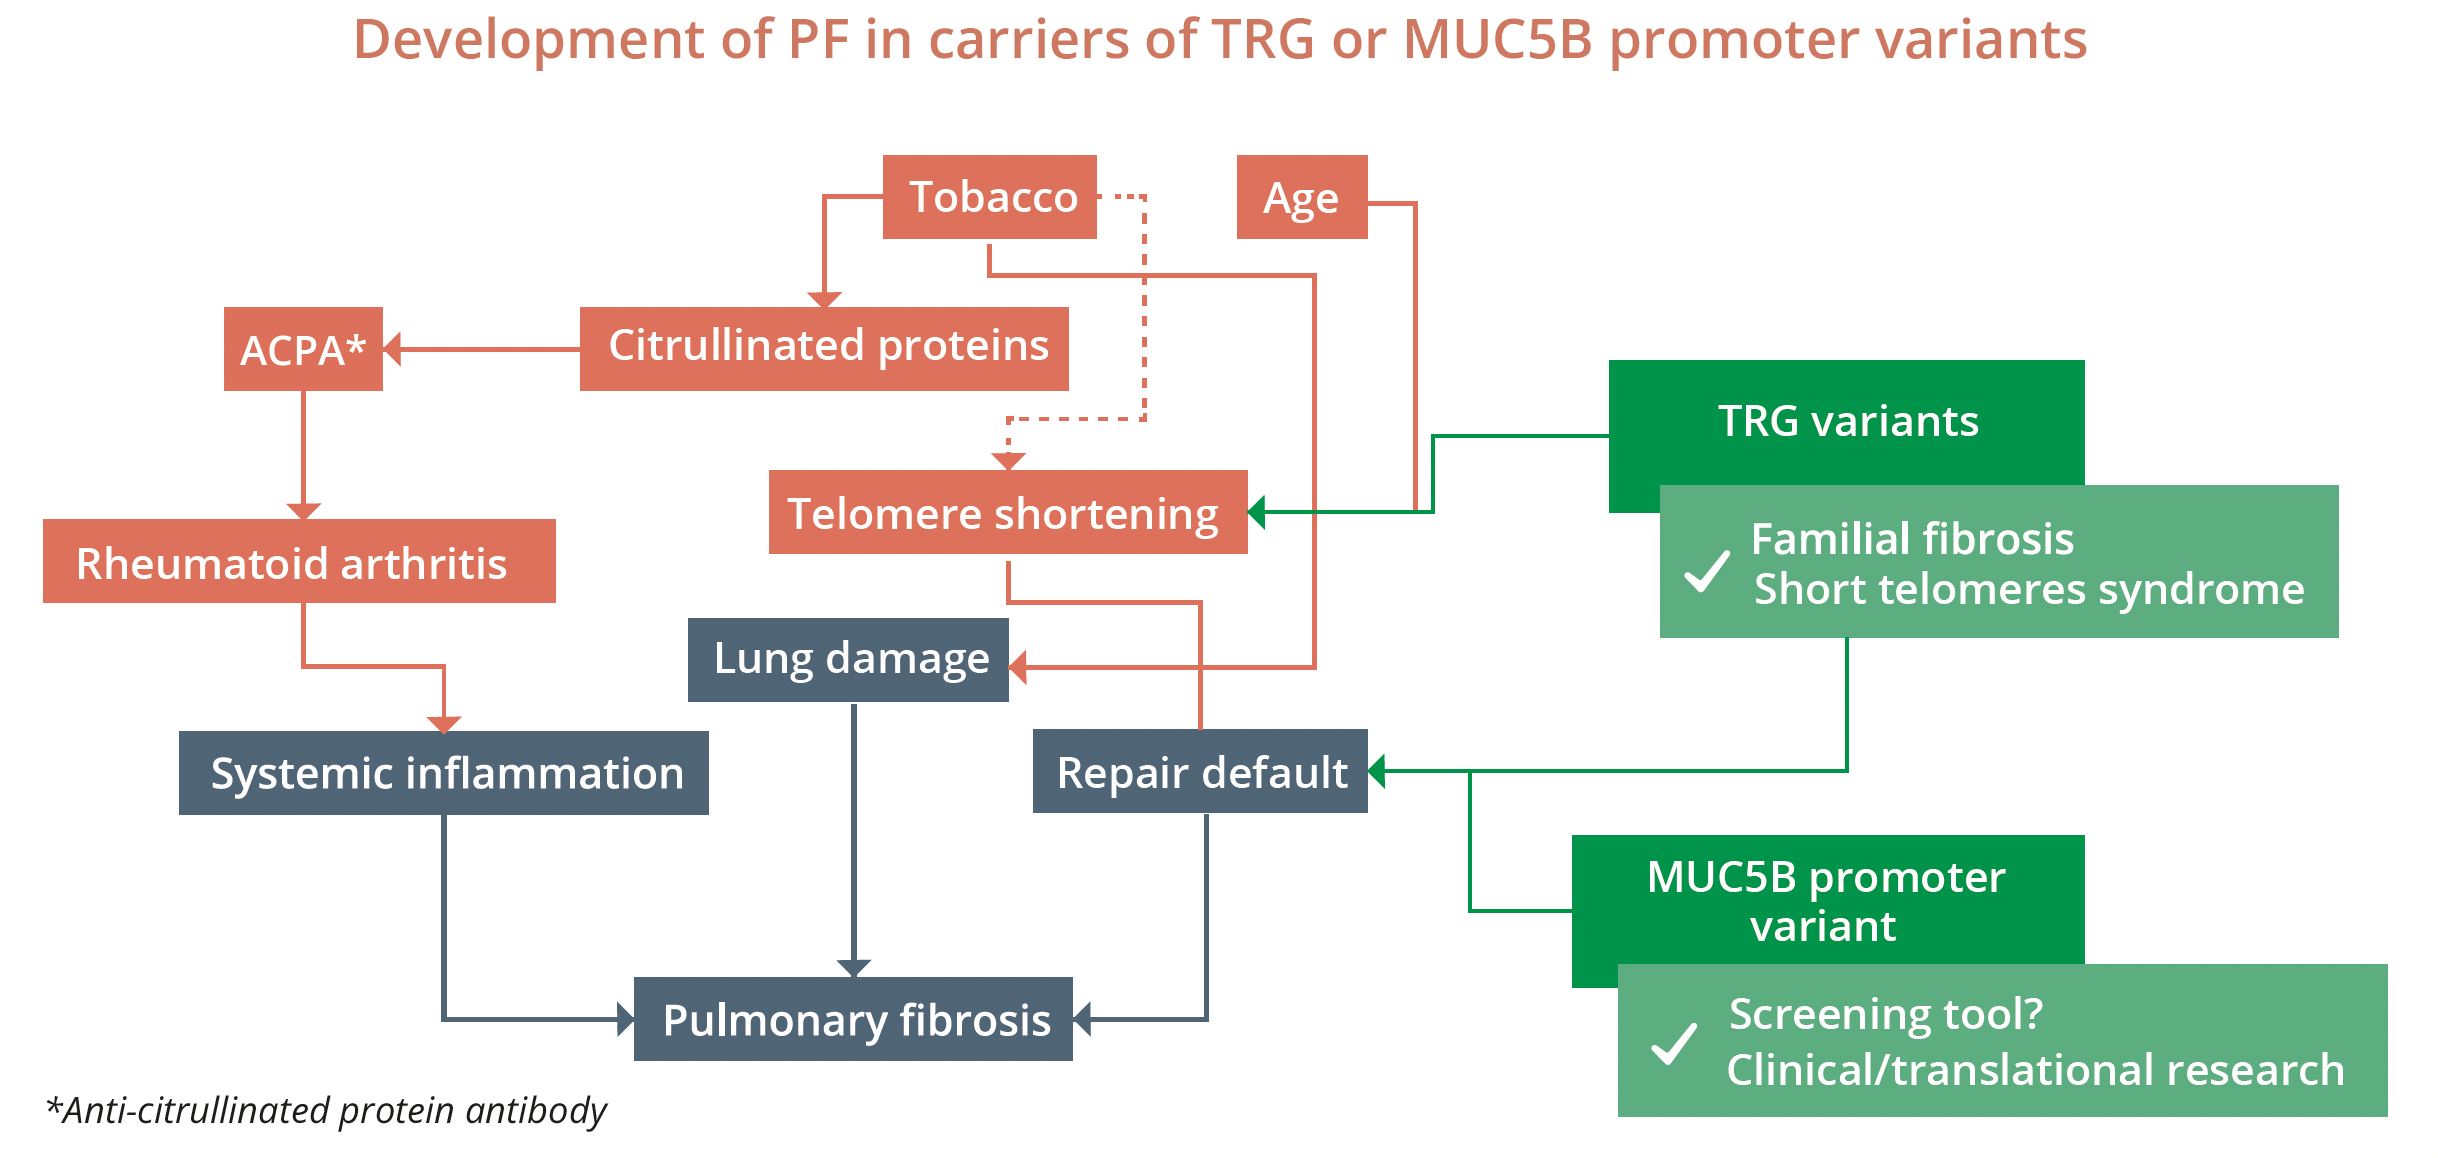 Development of pulmonary fibrosis in carriers of TRG or MUC5B promoter variants